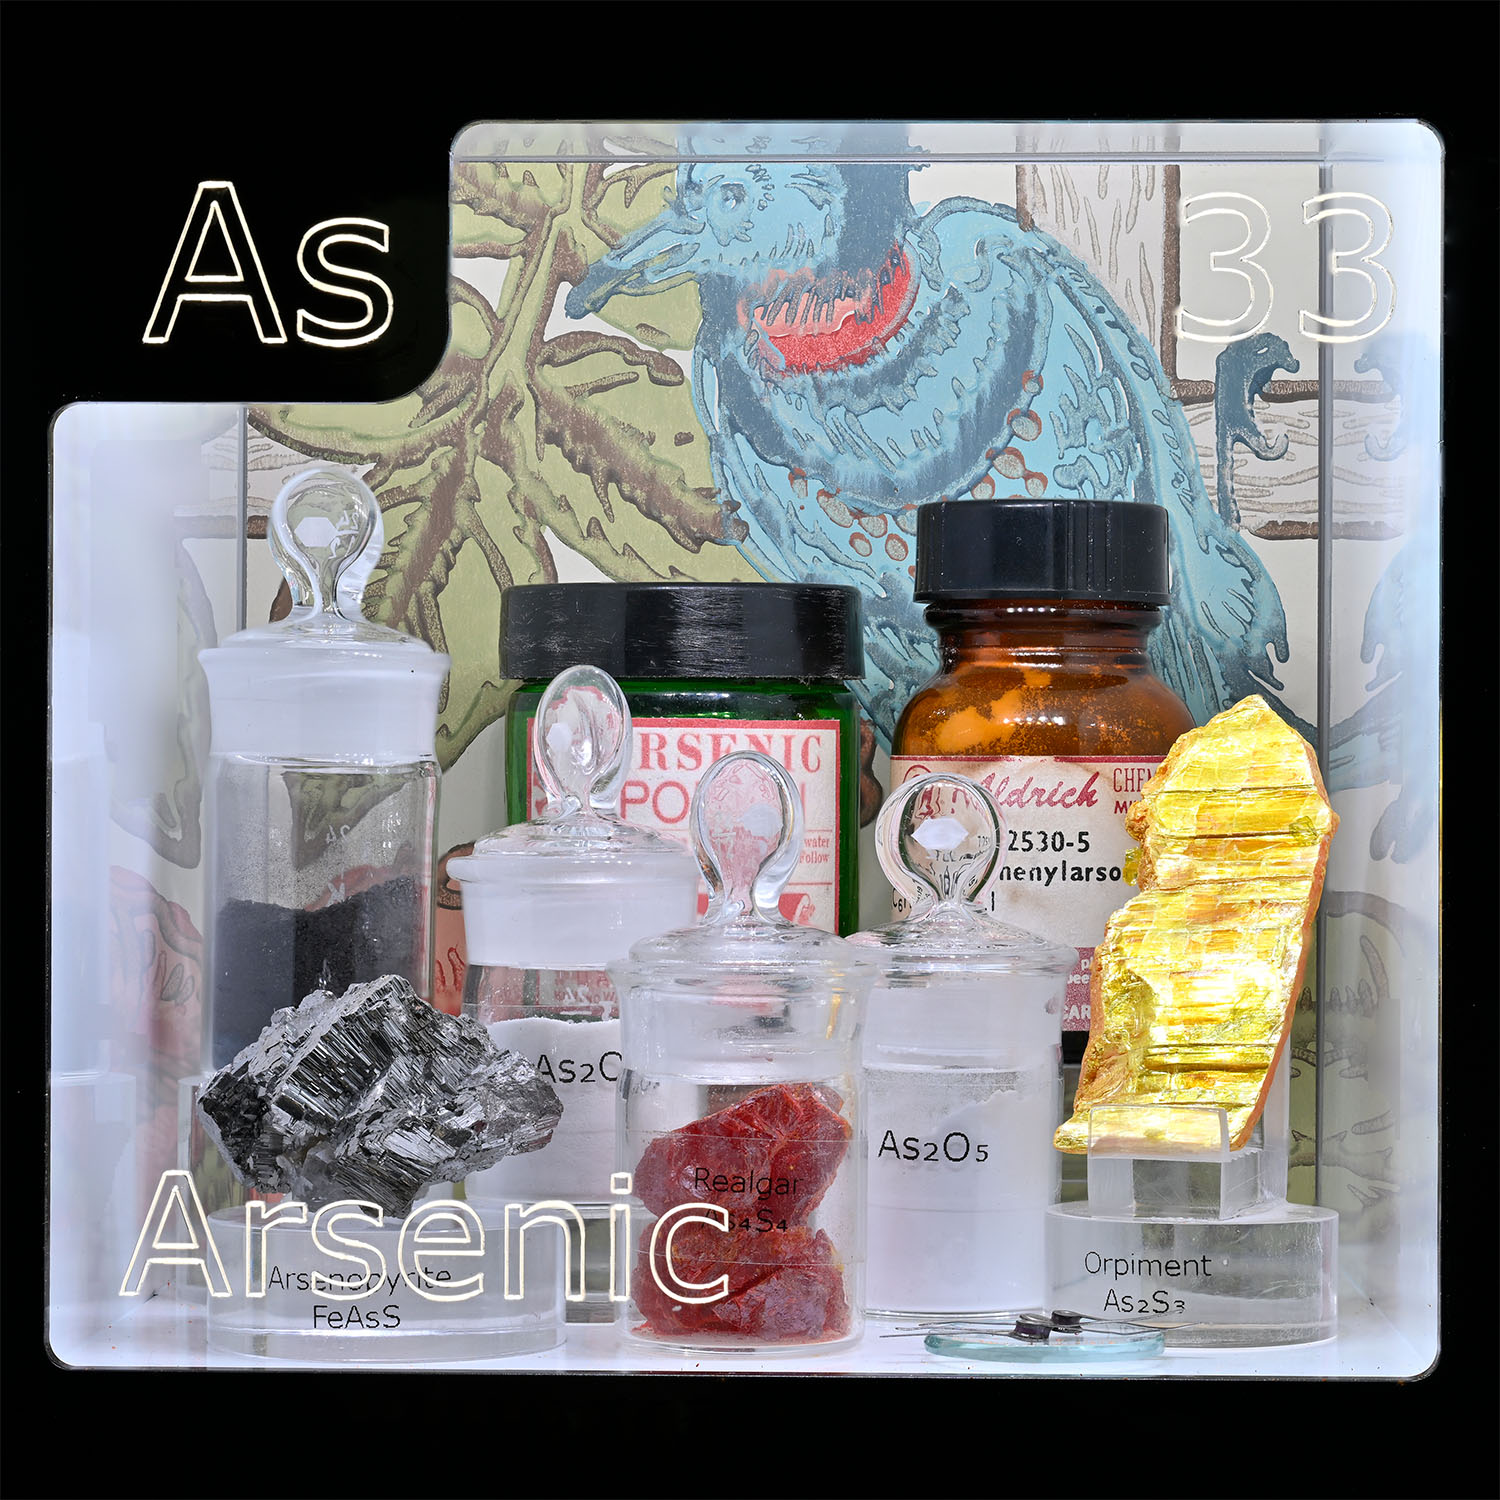 Periodic Table Display - close up of Arsenic and the items that contain that element